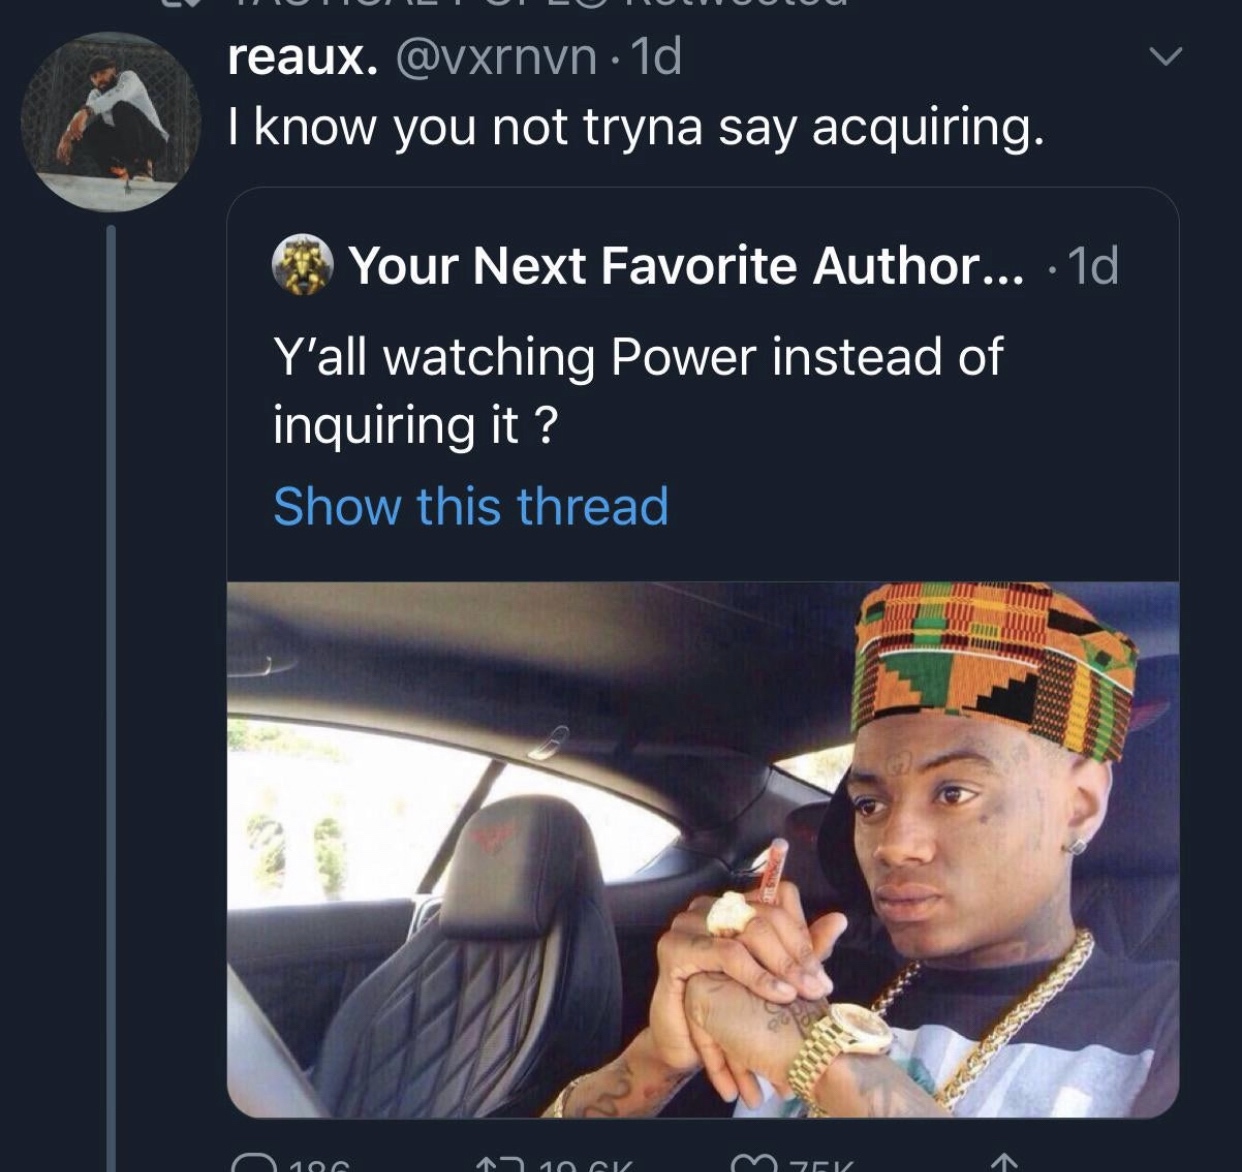 being ugly memes - reaux. 1d I know you not tryna say acquiring. Your Next Favorite Author... 1d Y'all watching Power instead of inquiring it ? Show this thread 10 19 10 Cv mok